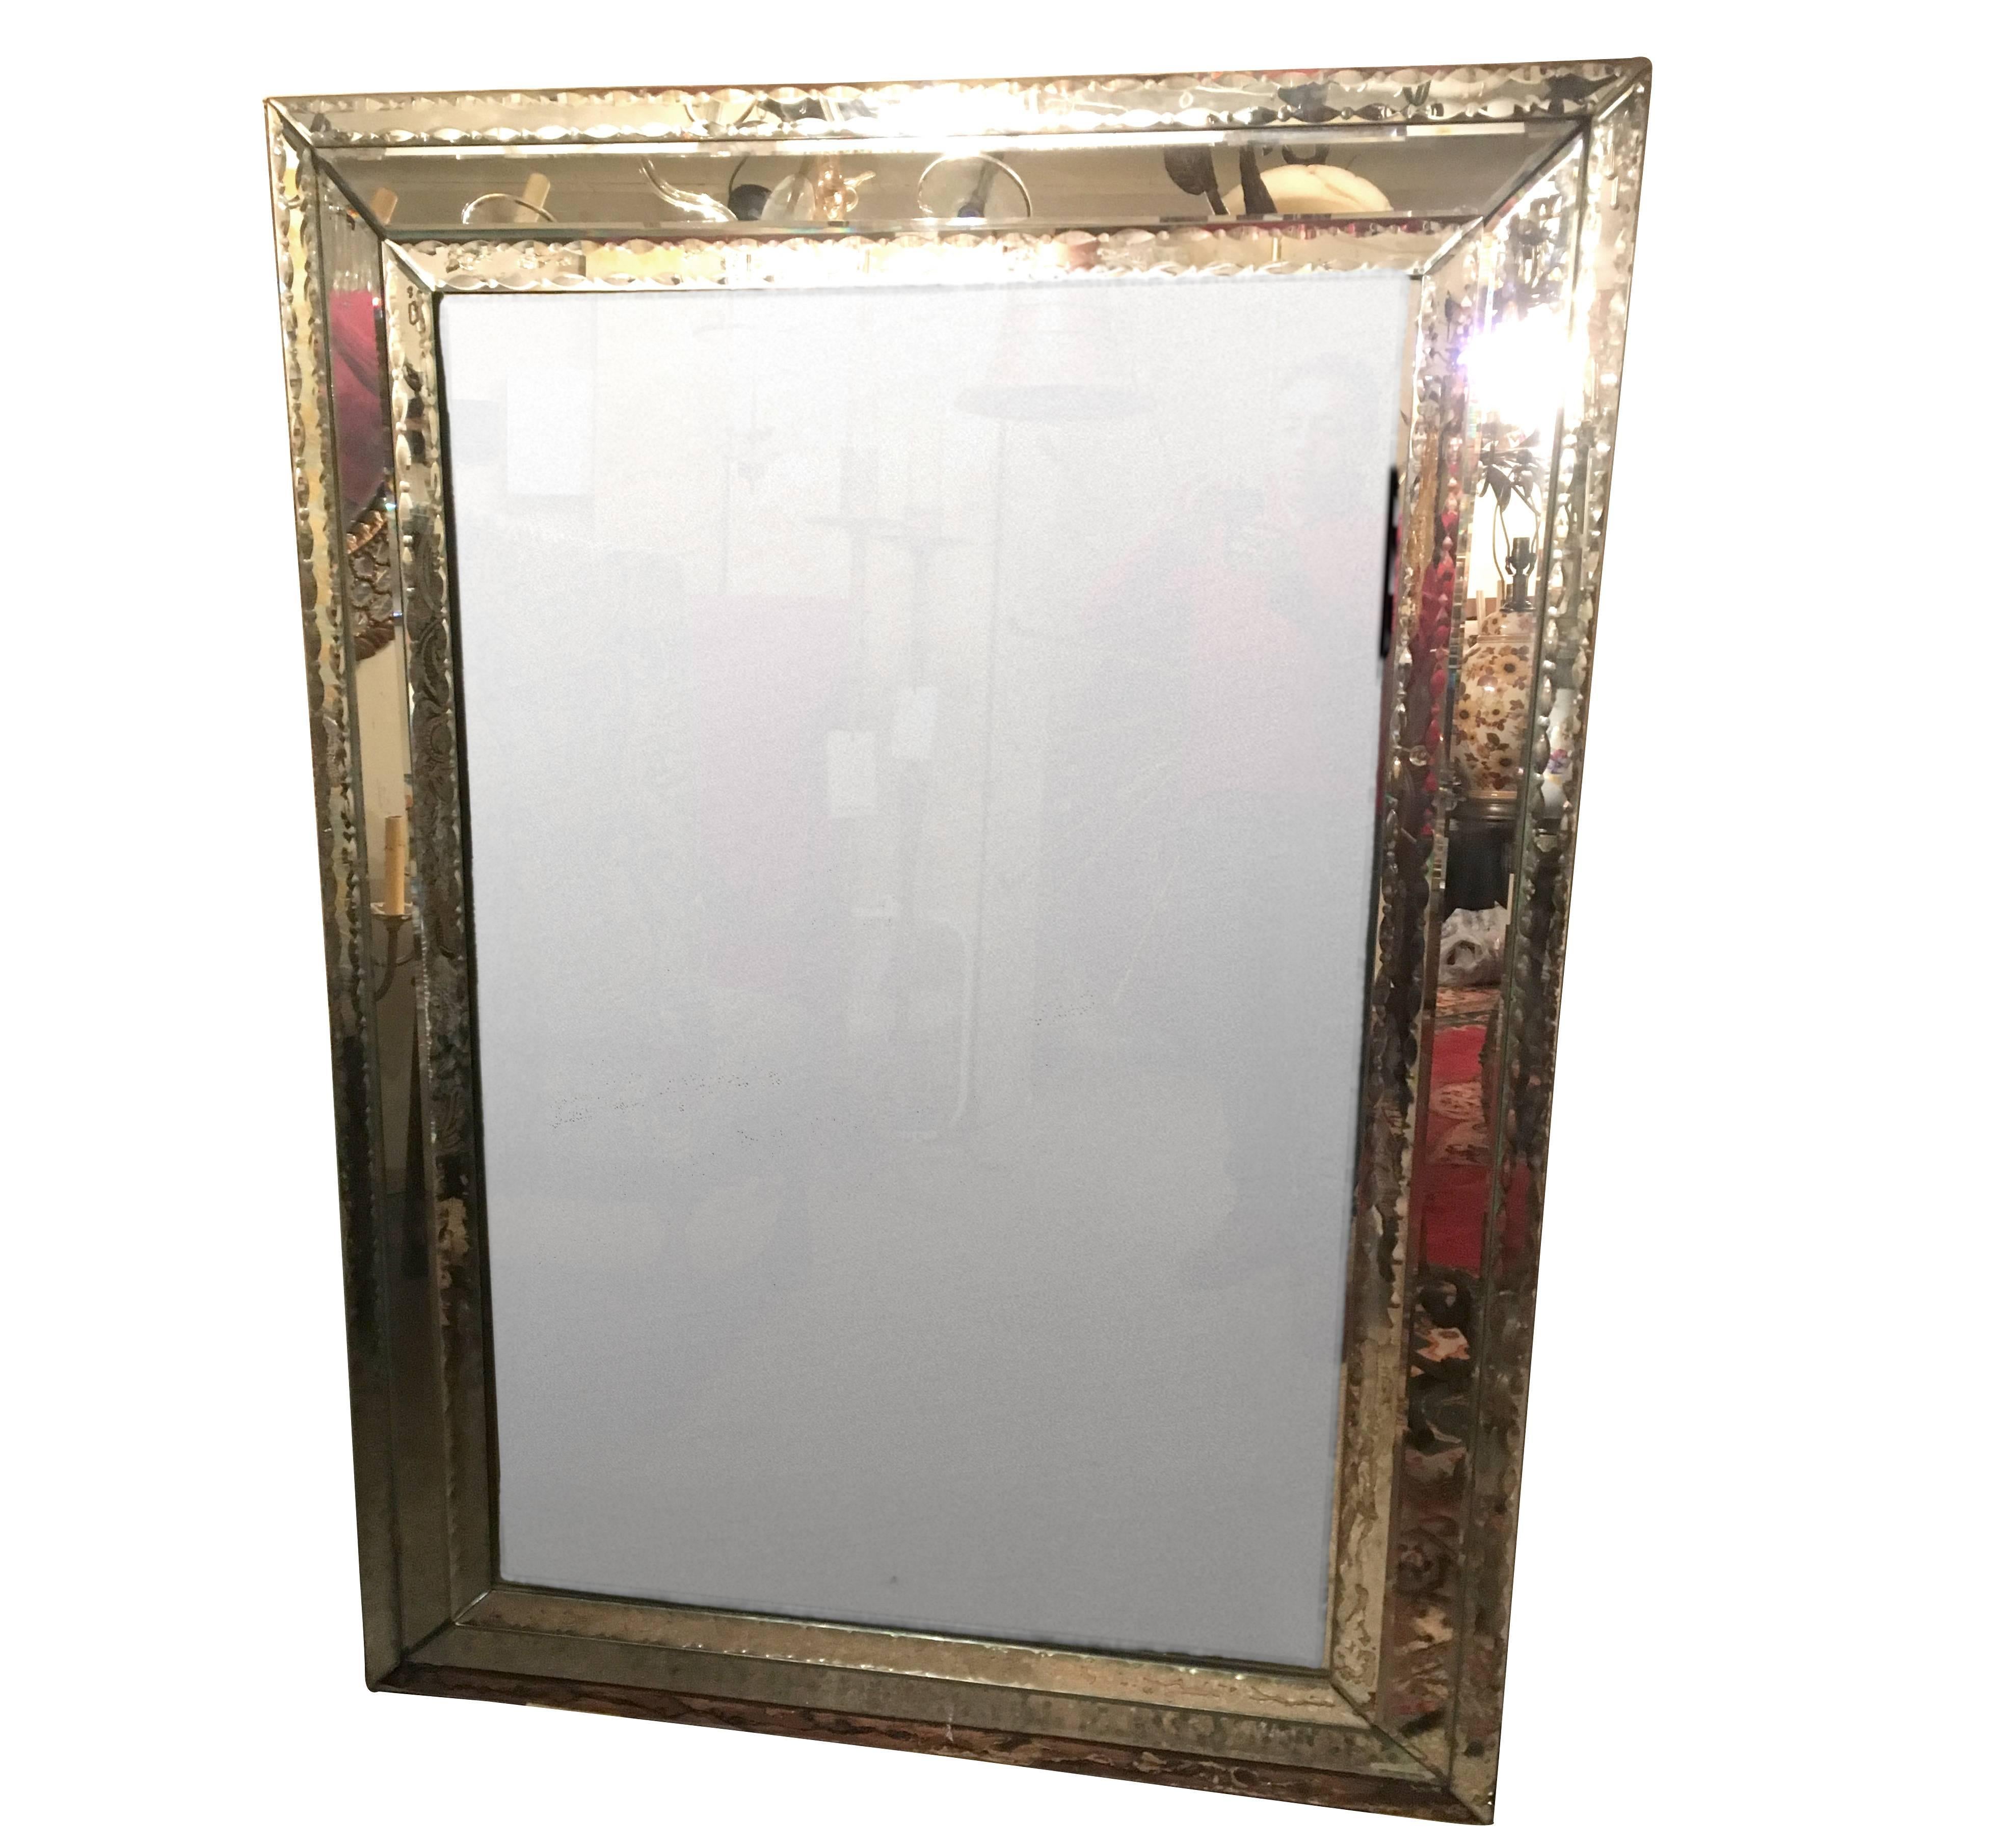 A pair of large circa 1960’s etched and beveled rectangular Venetian mirror.

Measurements:
Height: 60